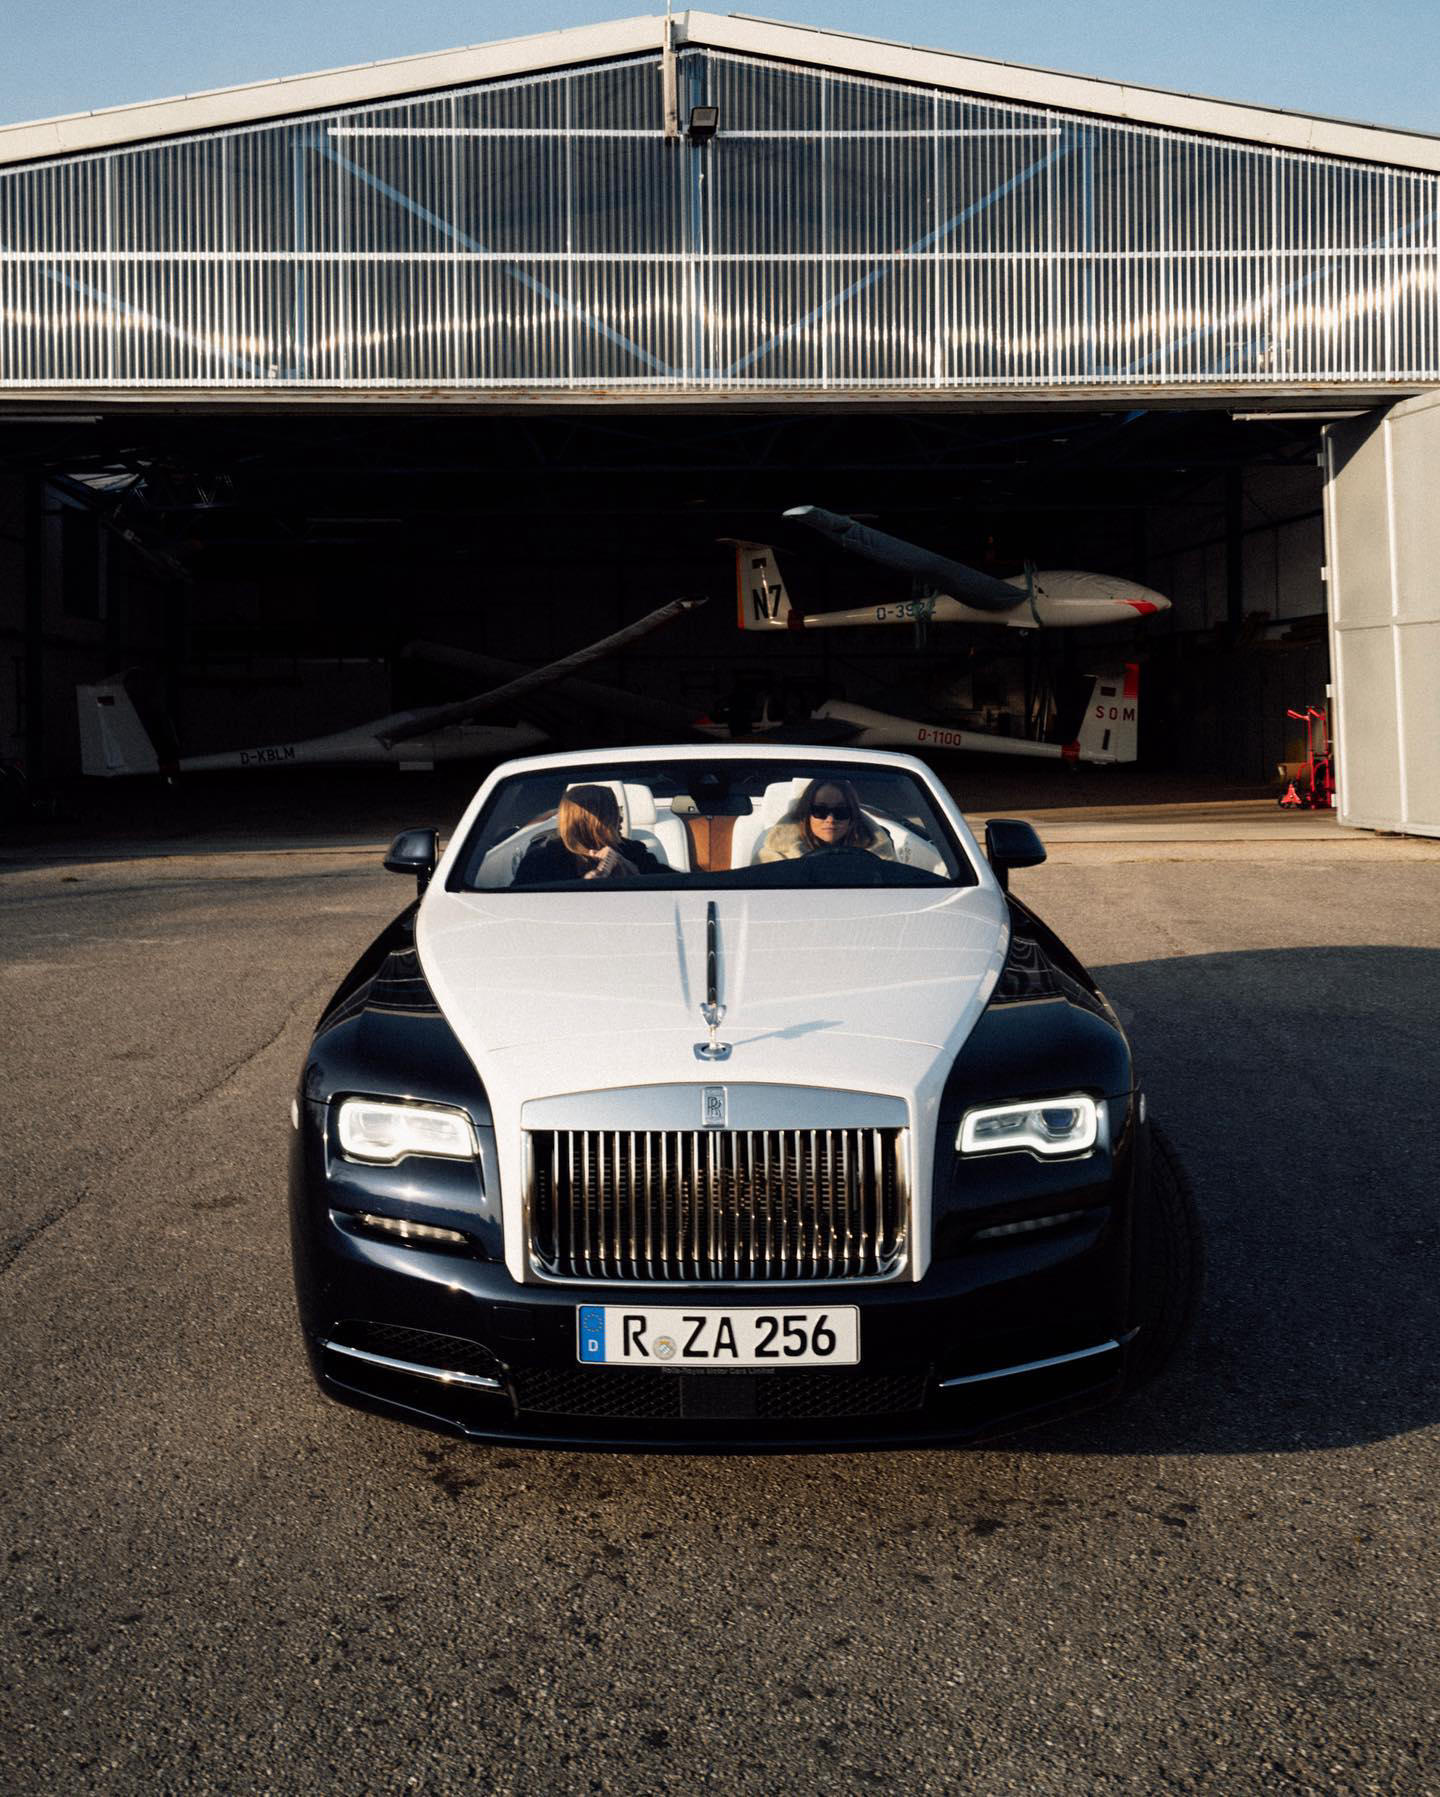 Rolls-Royce Motor Cars - Ascend to extraordinary heights with Dawn — a drophead coupé made for the f